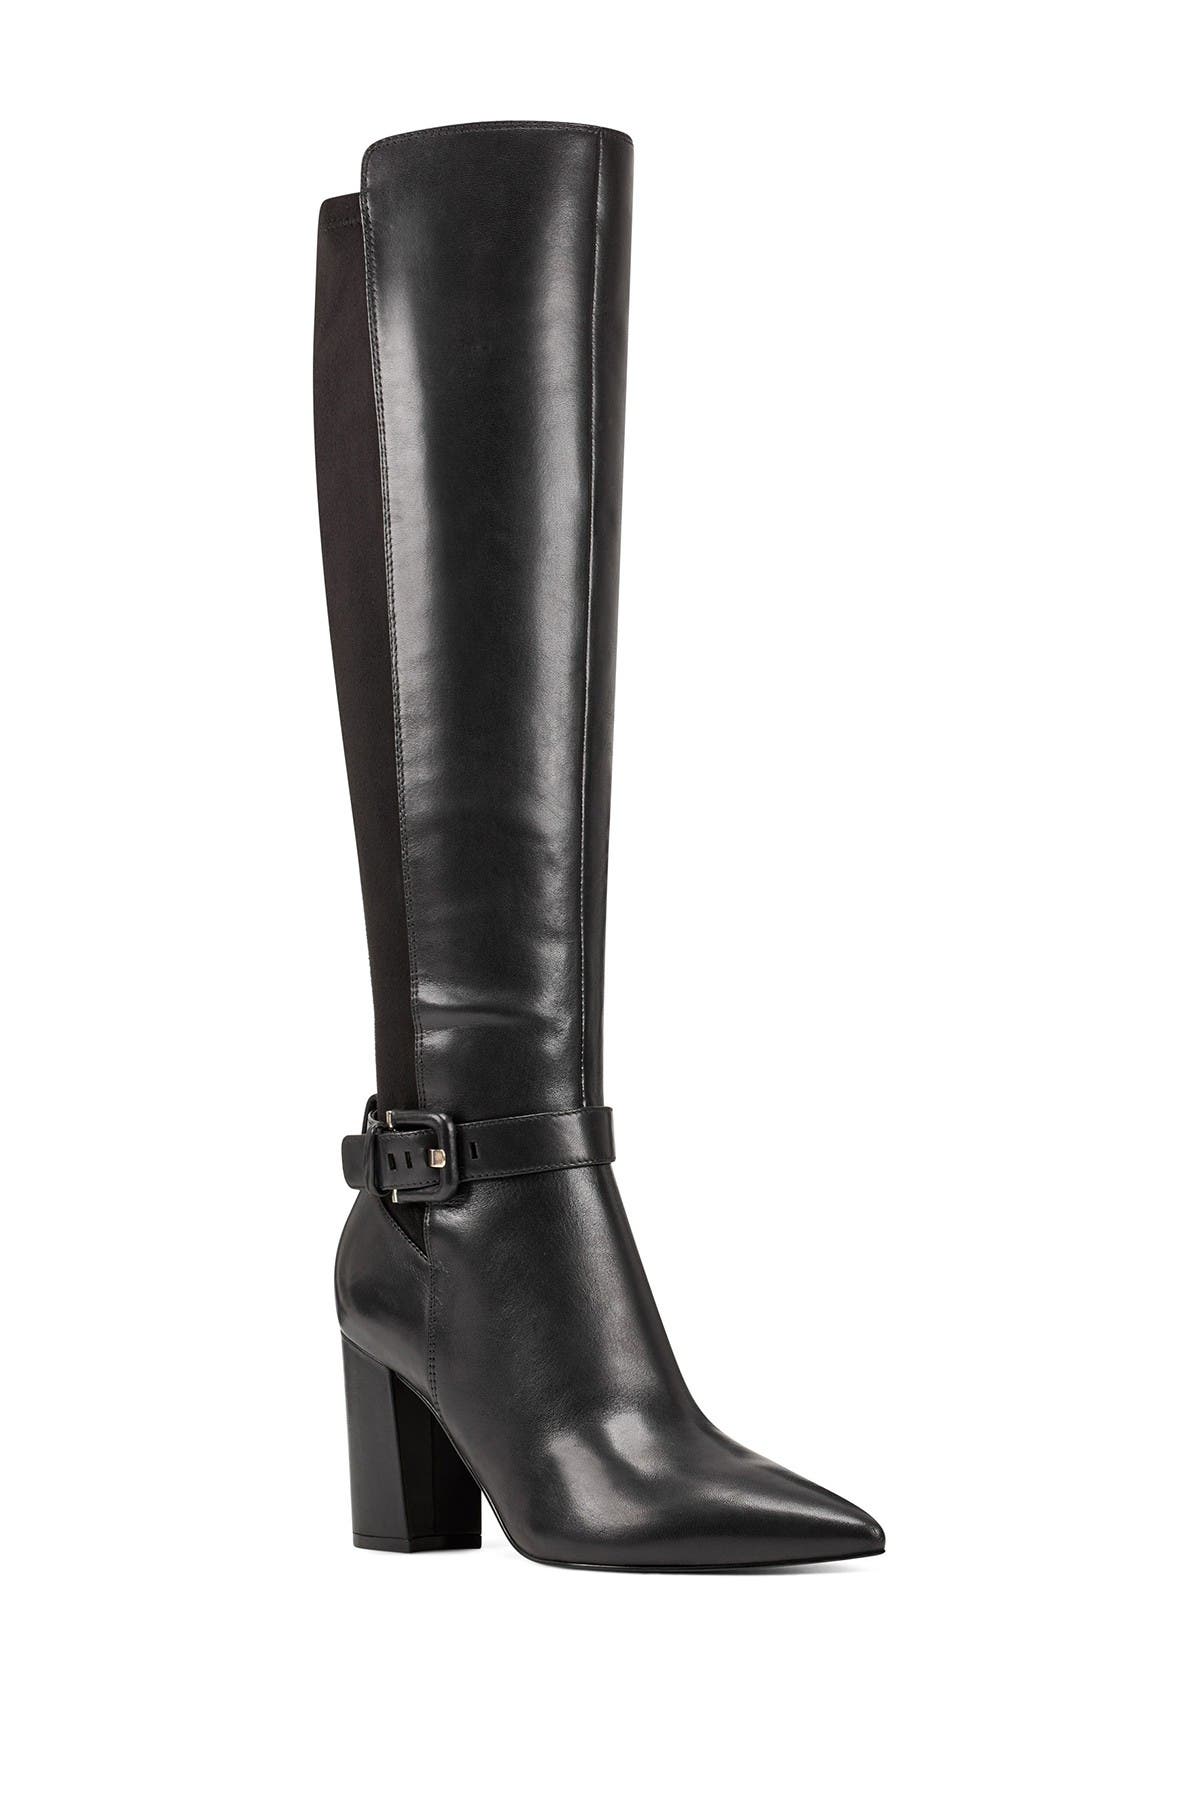 nine west knee high leather boots